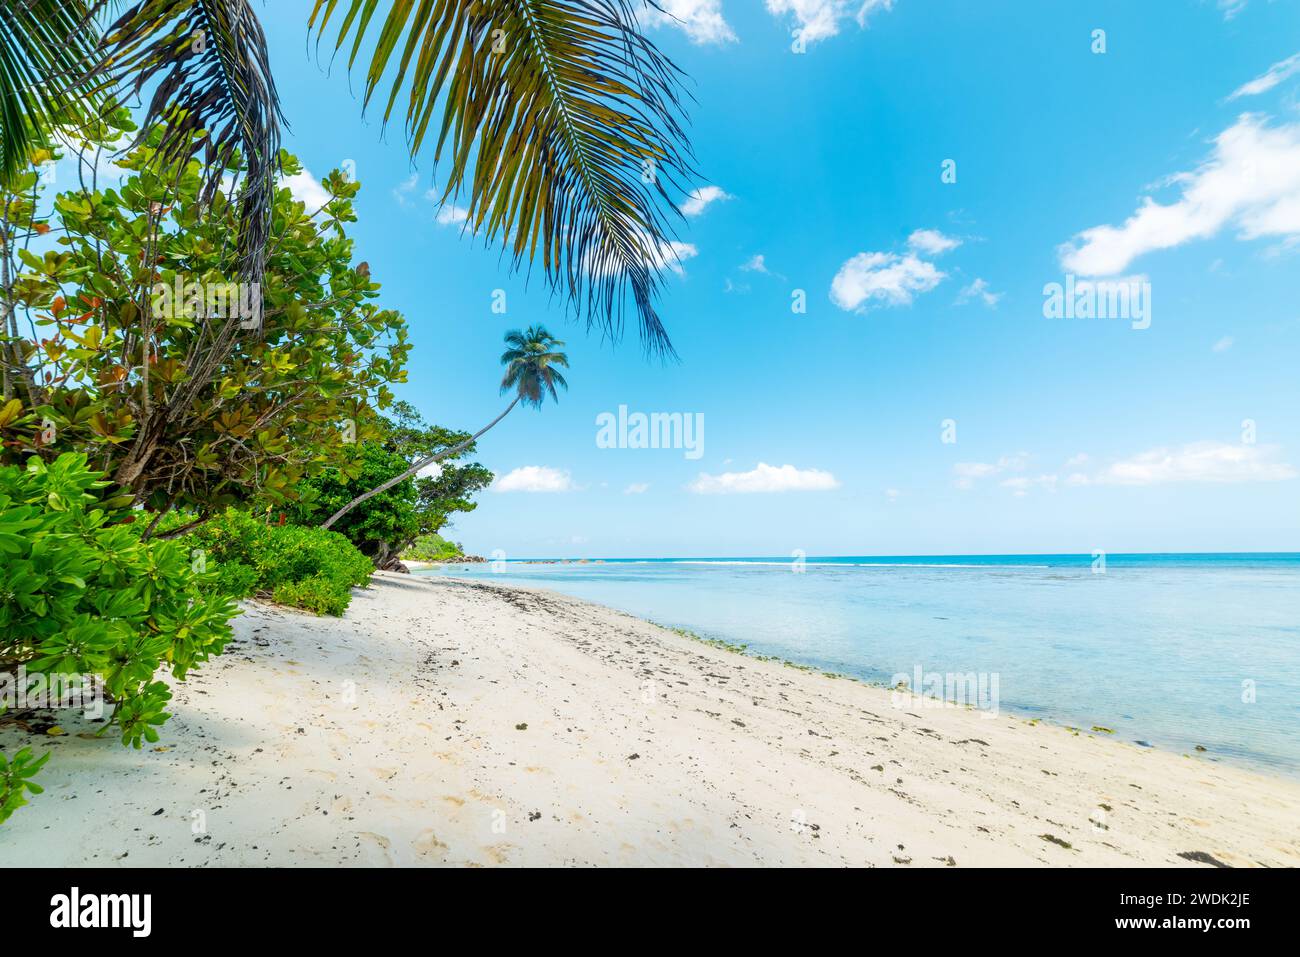 Palm trees and white sand in Anse Forbans beach. Mahe island, Seychelles Stock Photo